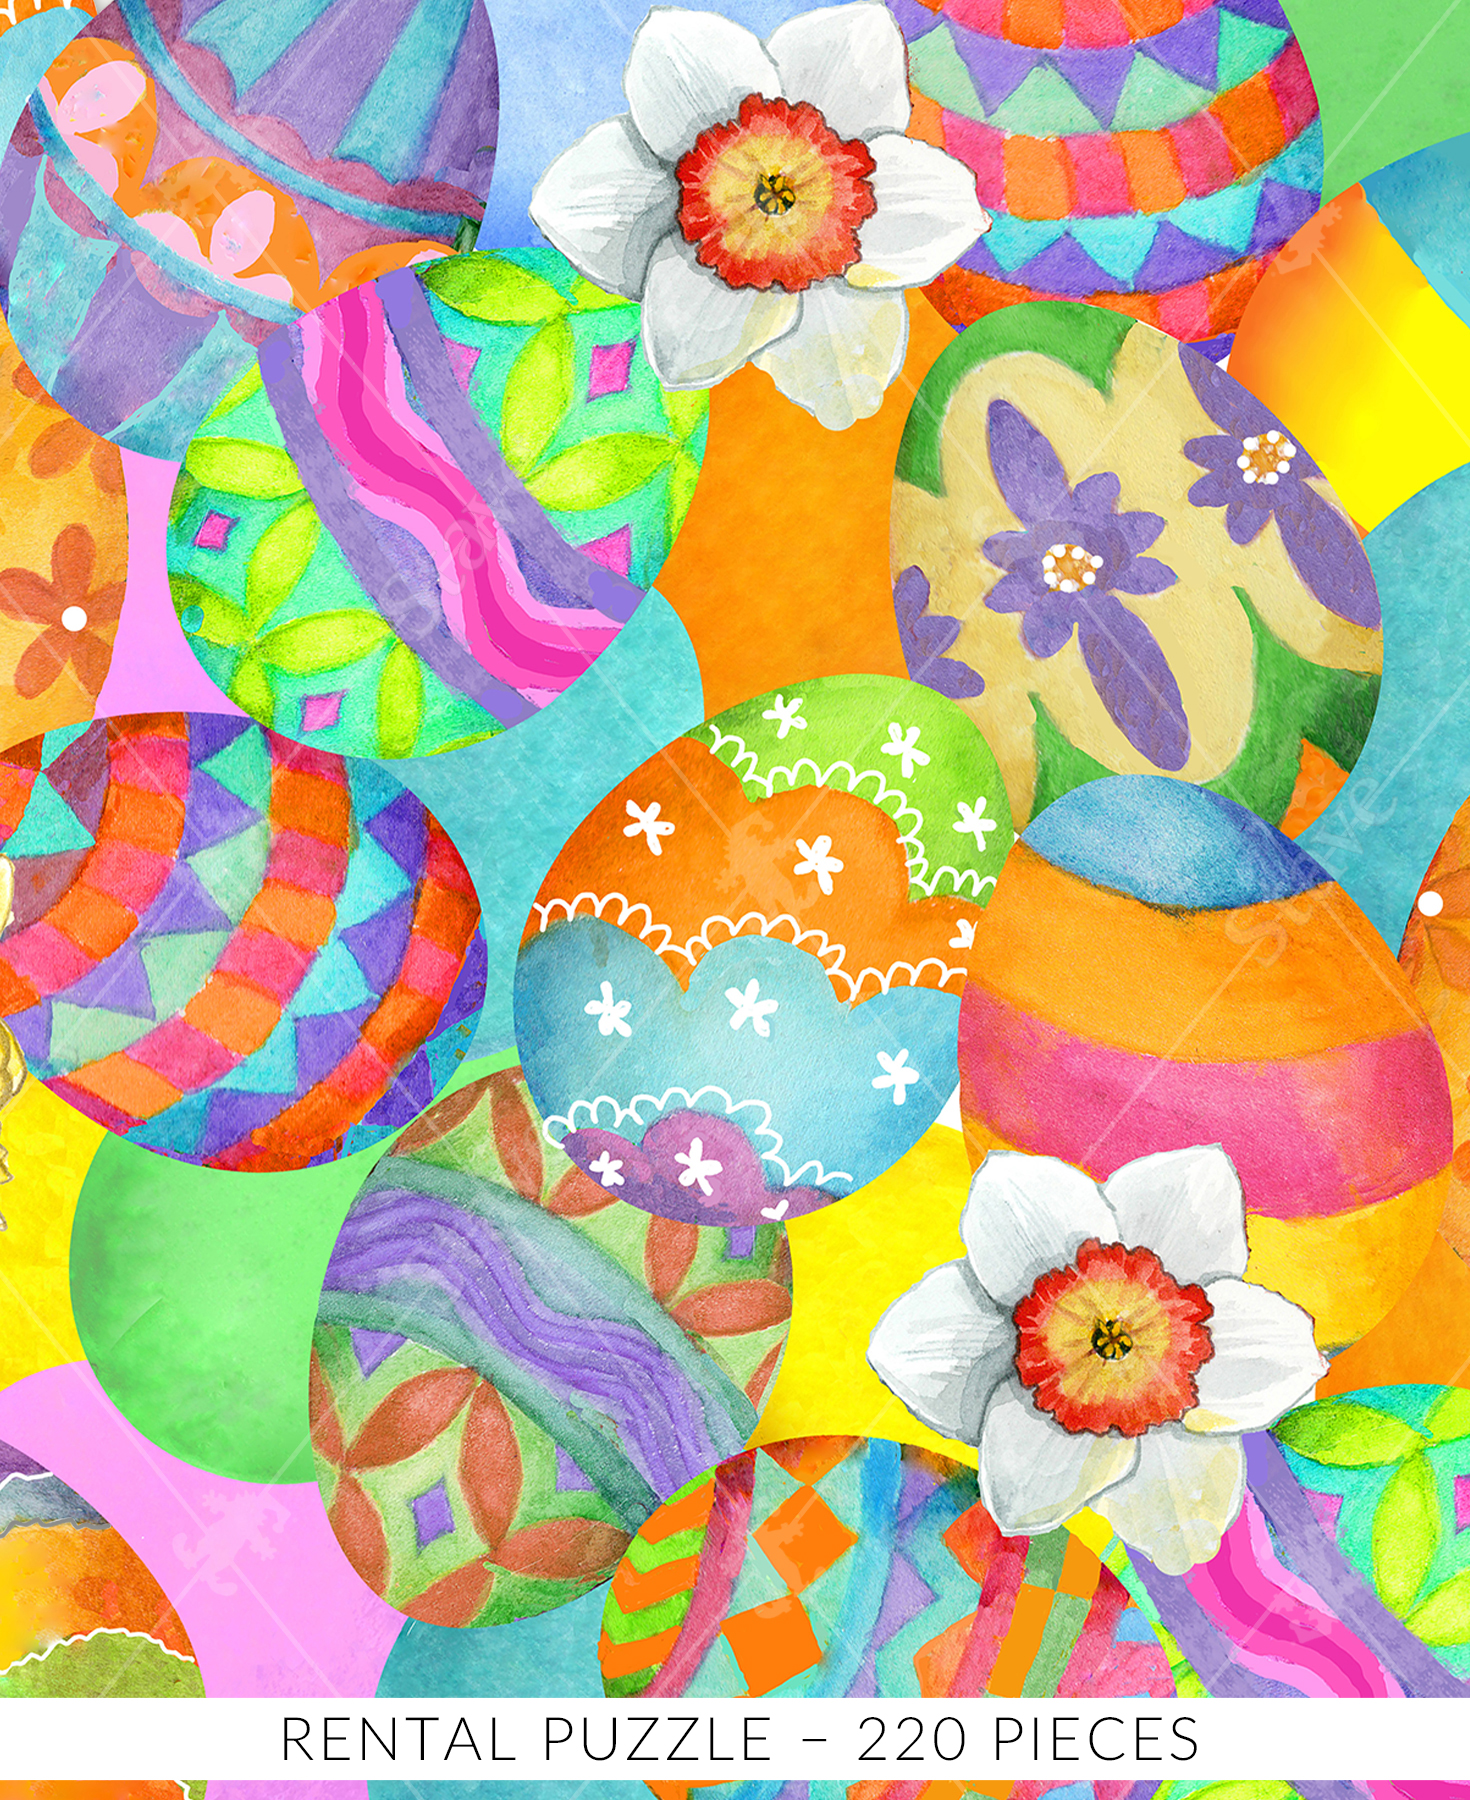 Close-up of Tossed Eggs wooden jigsaw puzzle featuring vibrant pile of Easter eggs, all with different colors and patterns. Three daffodils are scattered within the eggs, adding to the spring feel.